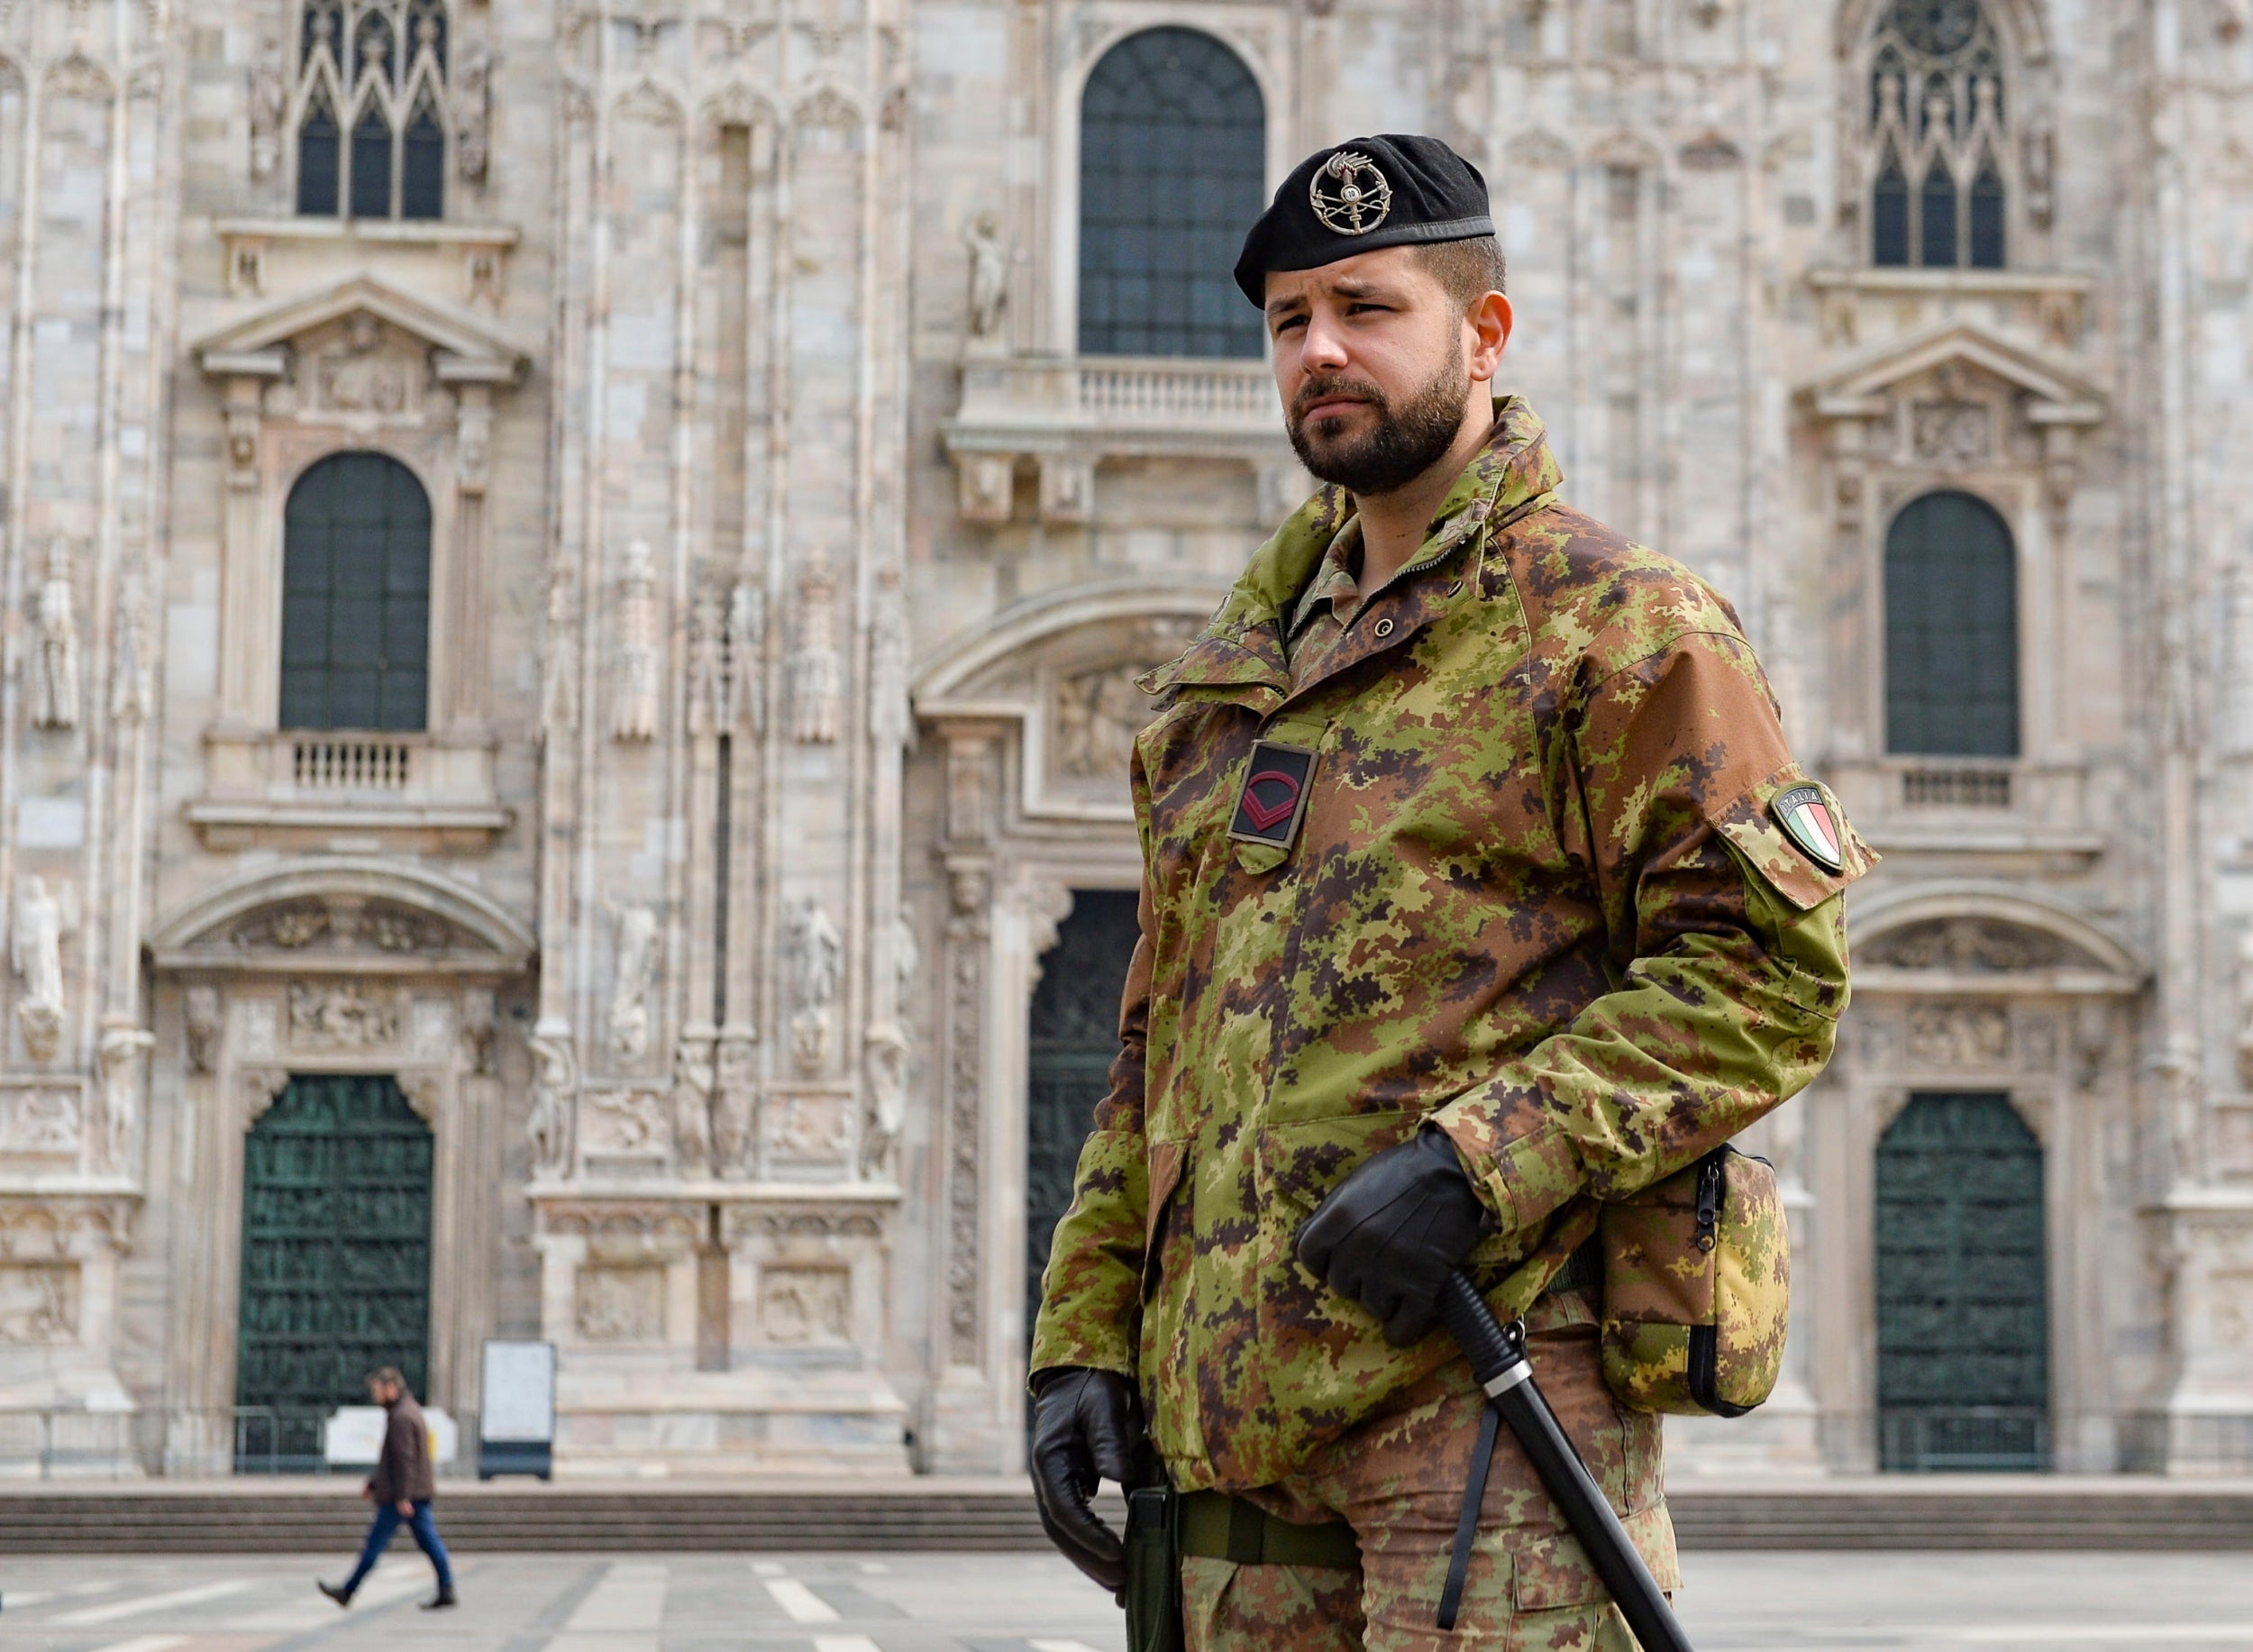 Soldiers of the Italian army patrol around the Piazza del Duomo, Milan